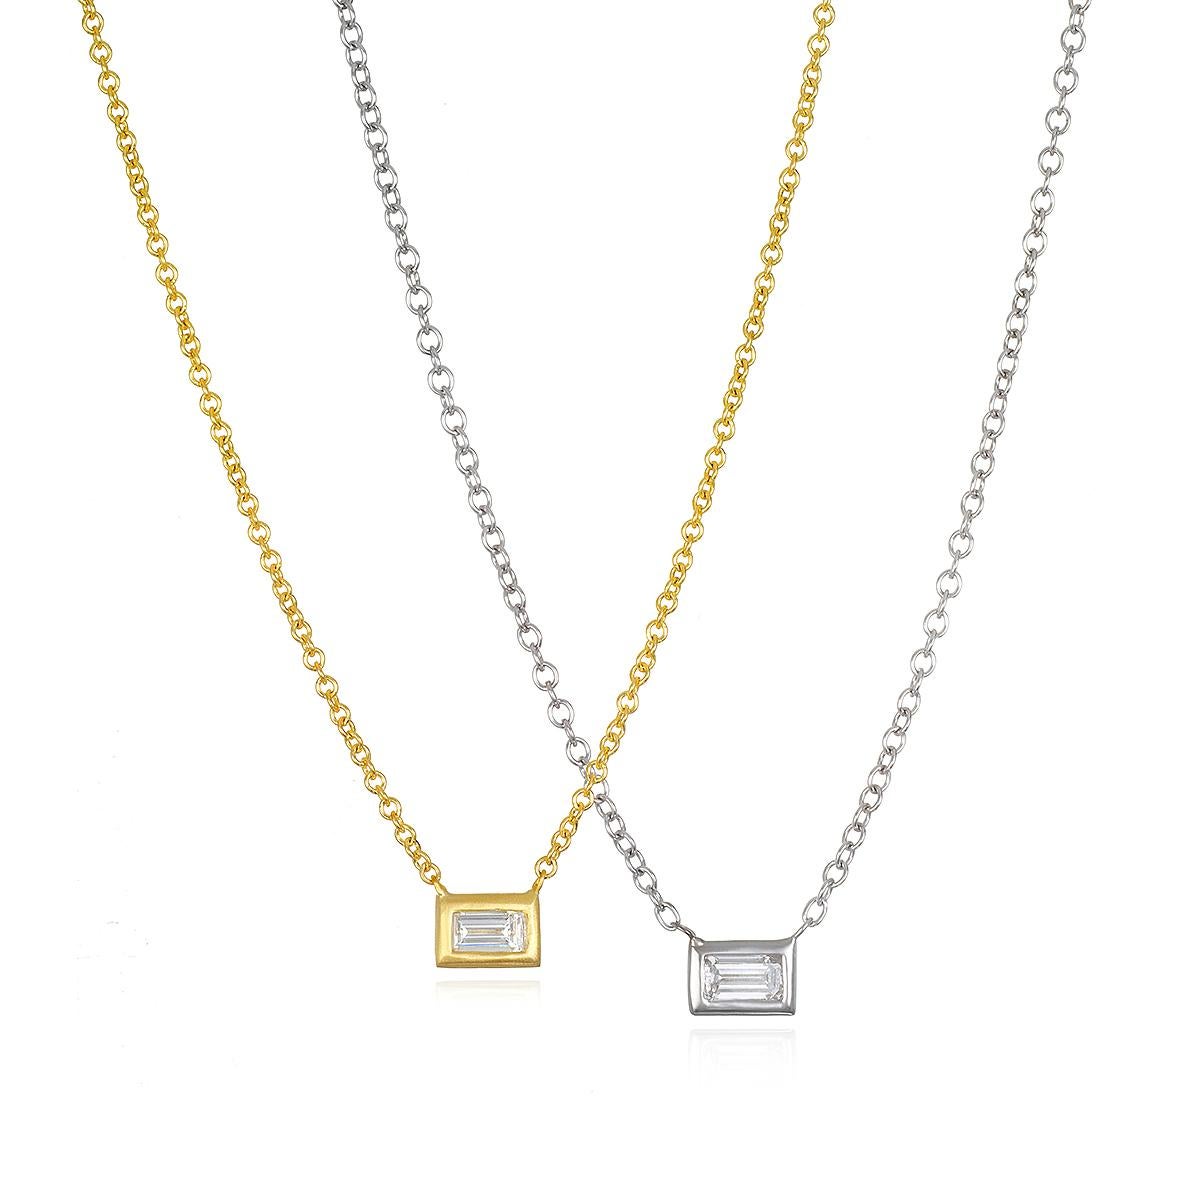 Faye Kim's 18k Green Gold Diamond Baguette Drop Necklace with a bezel setting is a simple, classic design.
Whether your style is traditional or contemporary, it's great as a foundation piece or to layer with larger, longer necklaces.